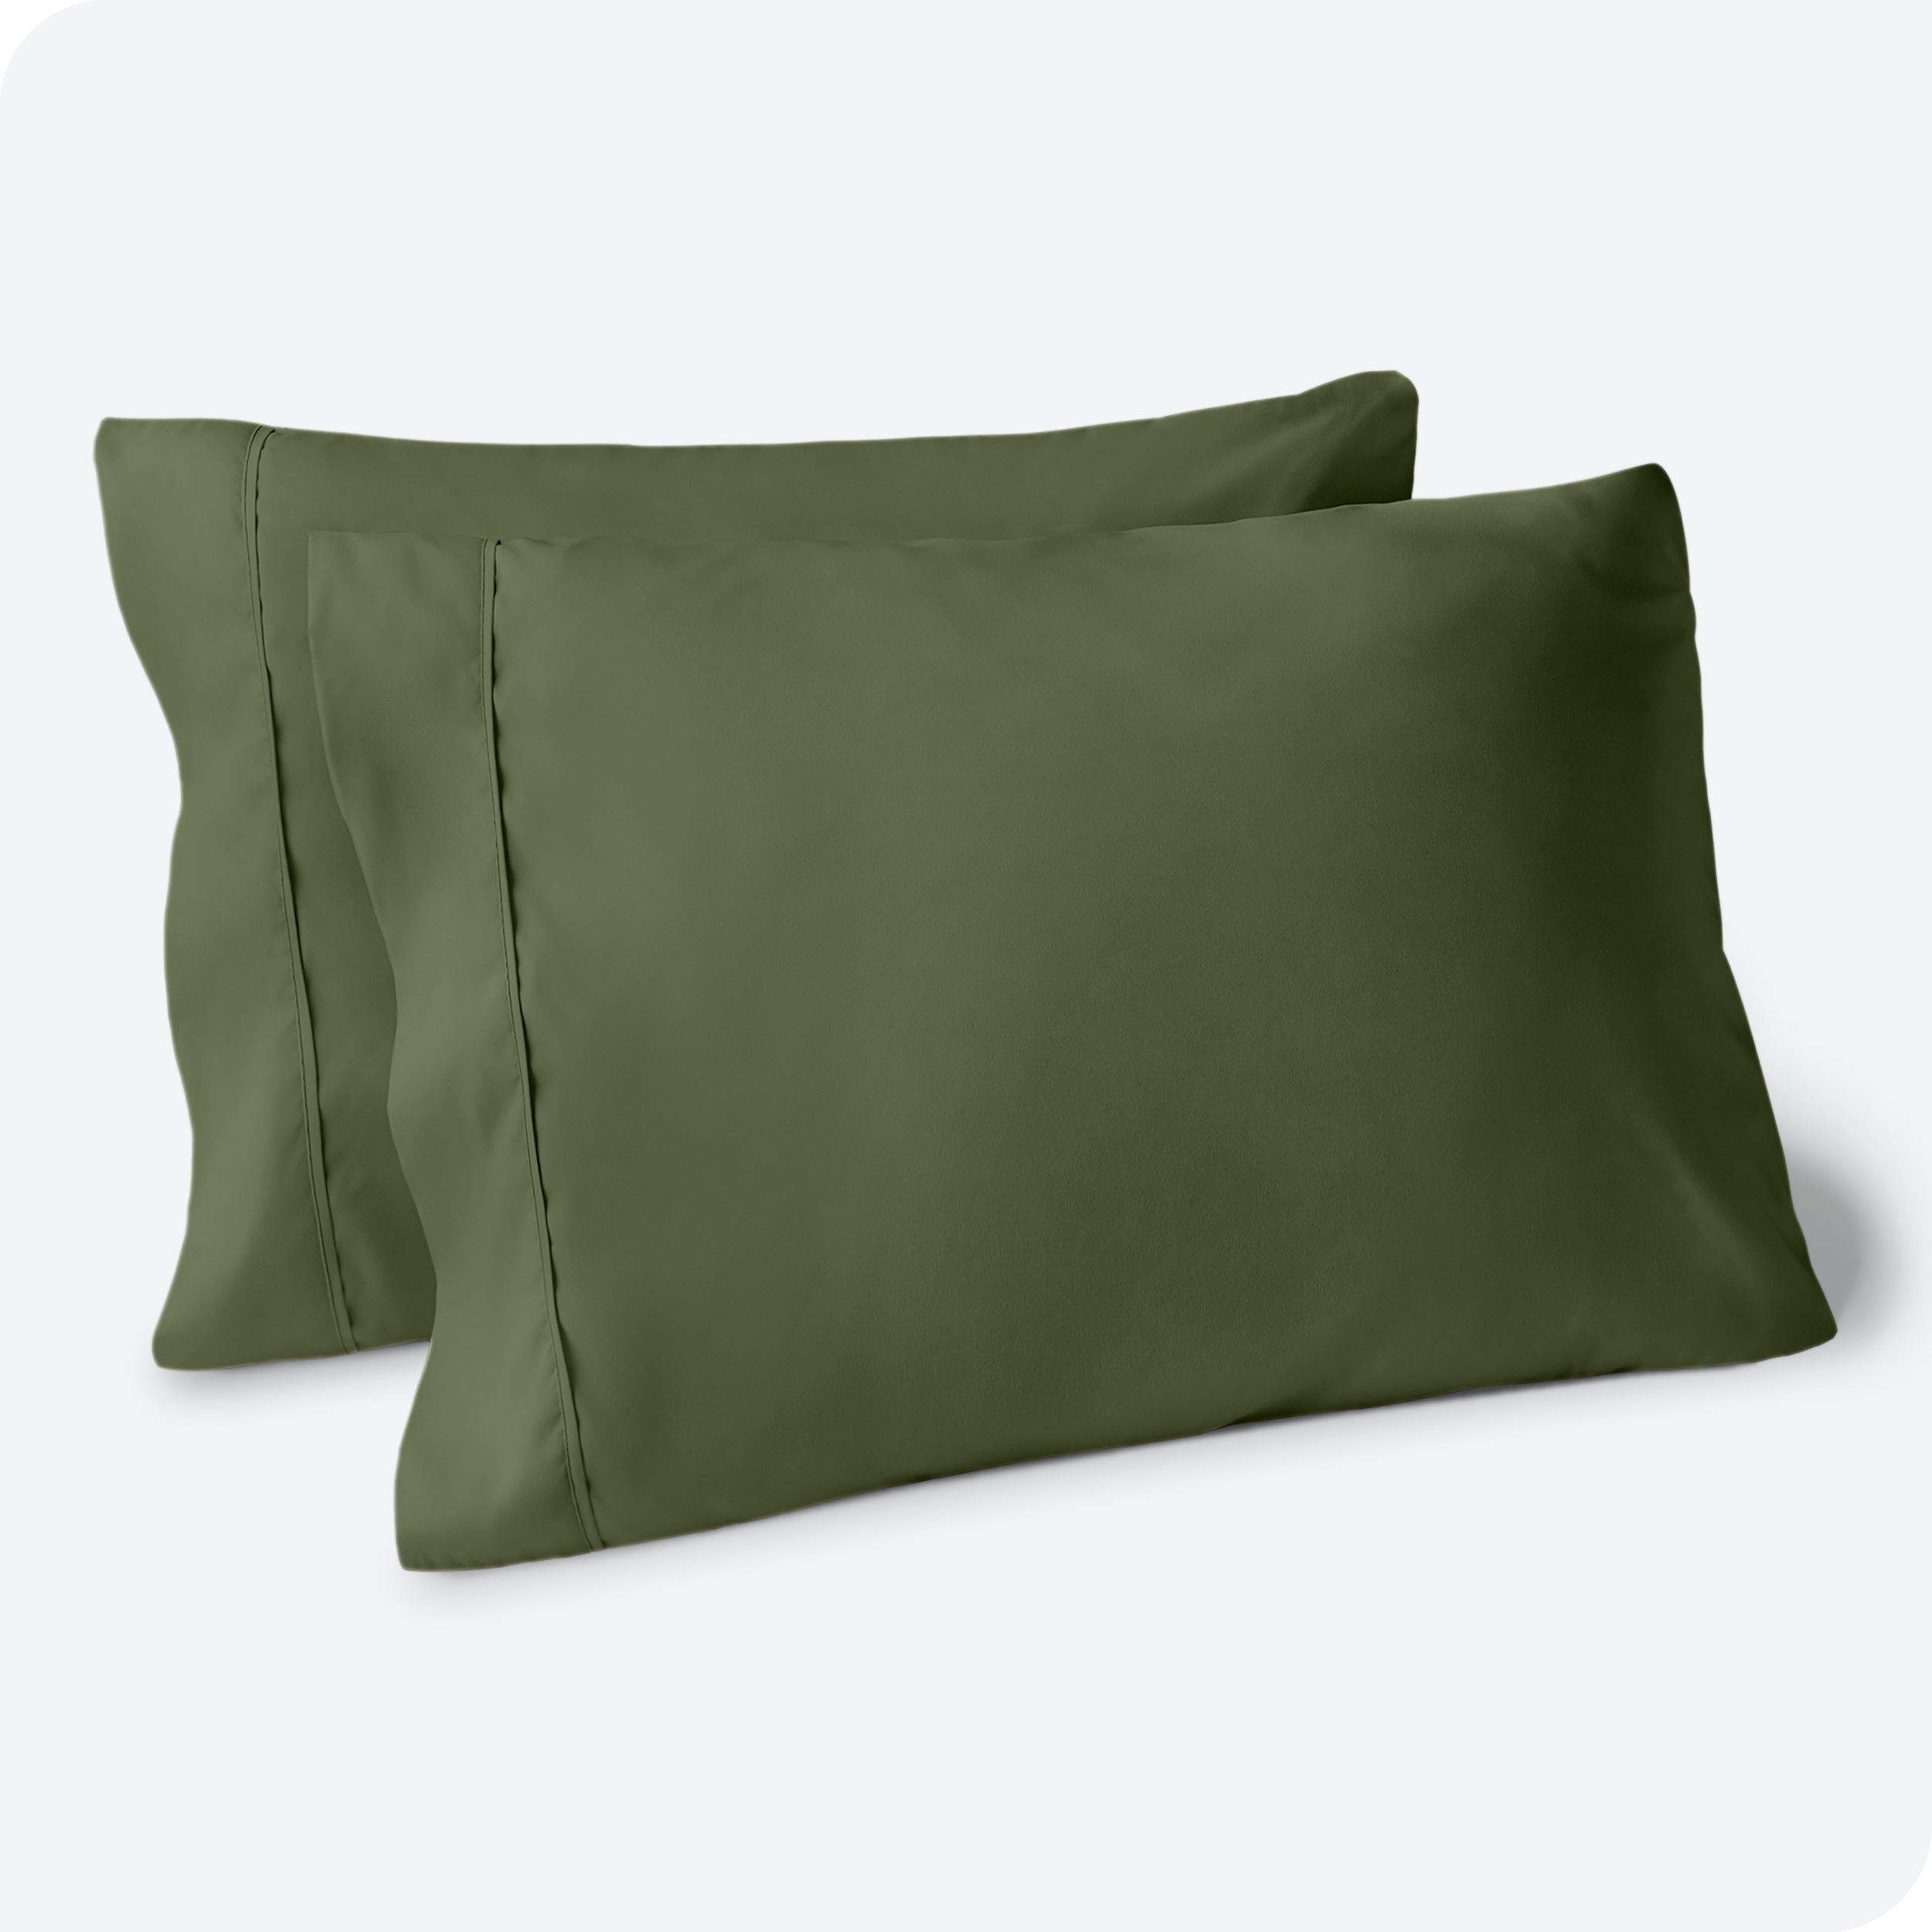 Two pillows on a white background with green pillowcases on them